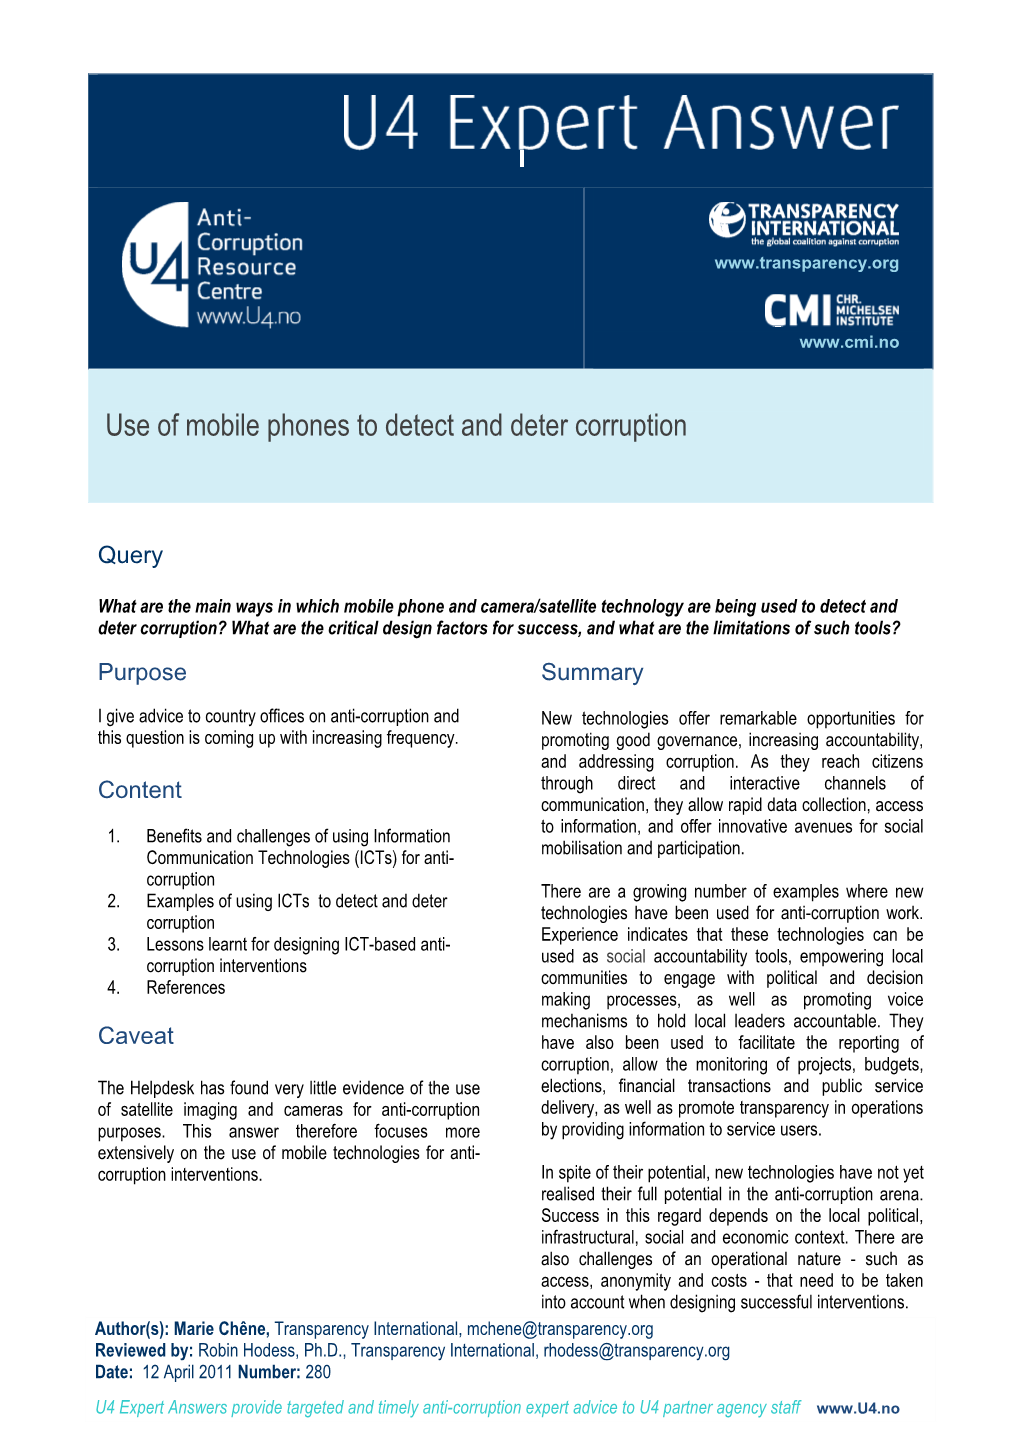 Use of Mobile Phones to Detect and Deter Corruption